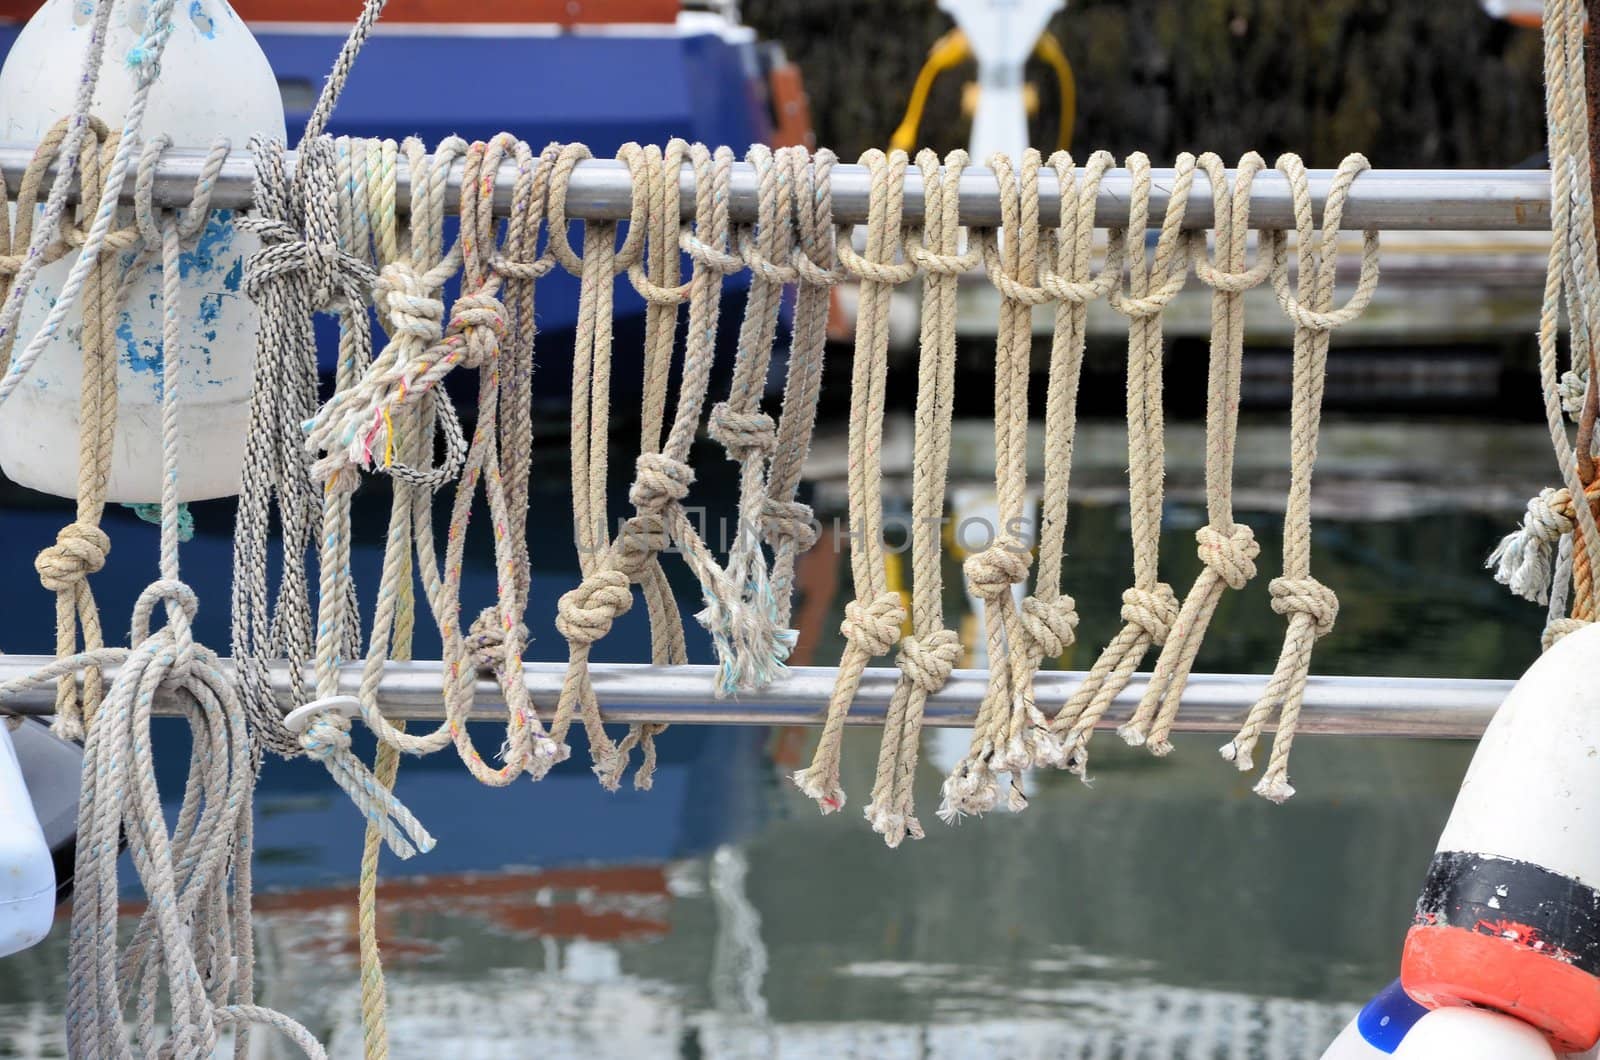 Rope tied on a lobster boat ready to be used